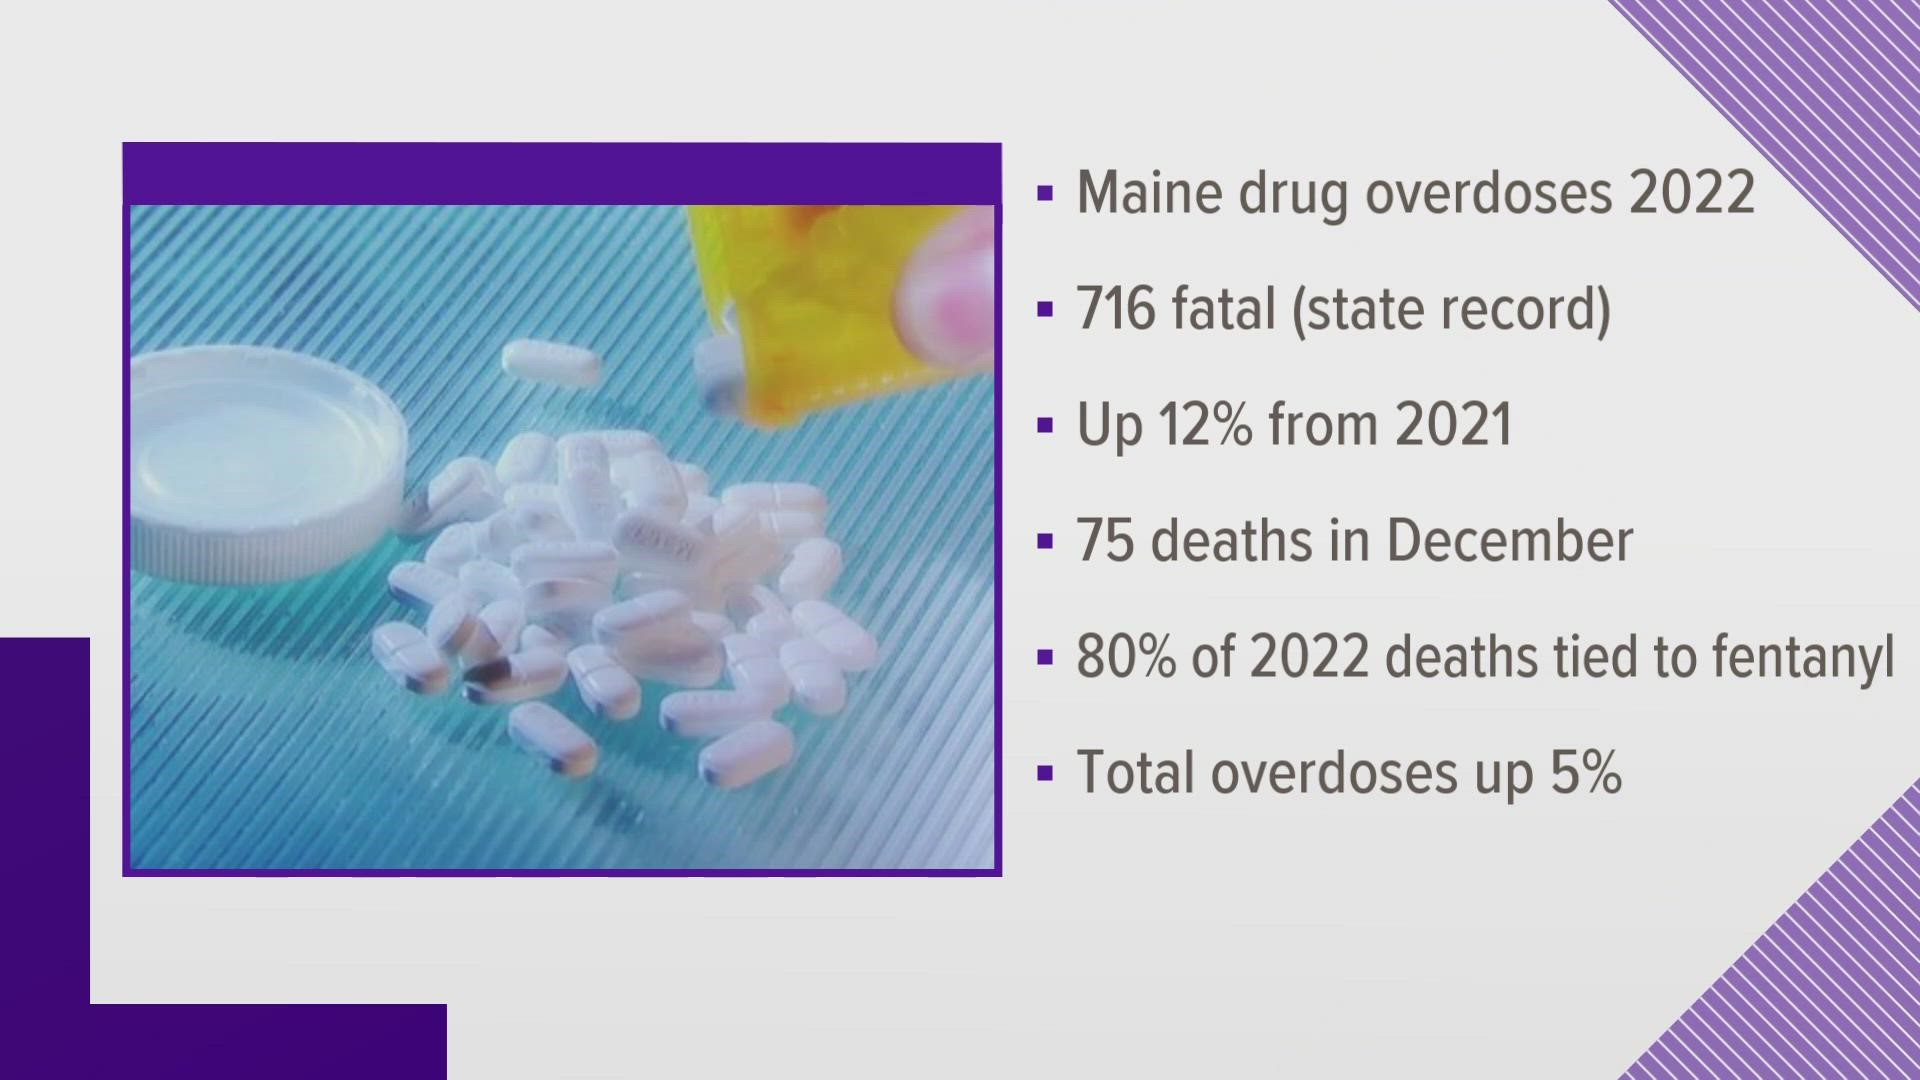 In 2022, 716 people died from a drug overdose, which is up 12% from 2021. In December, 75 people died. About 80% of the deaths in 2022 were tied to fentanyl.